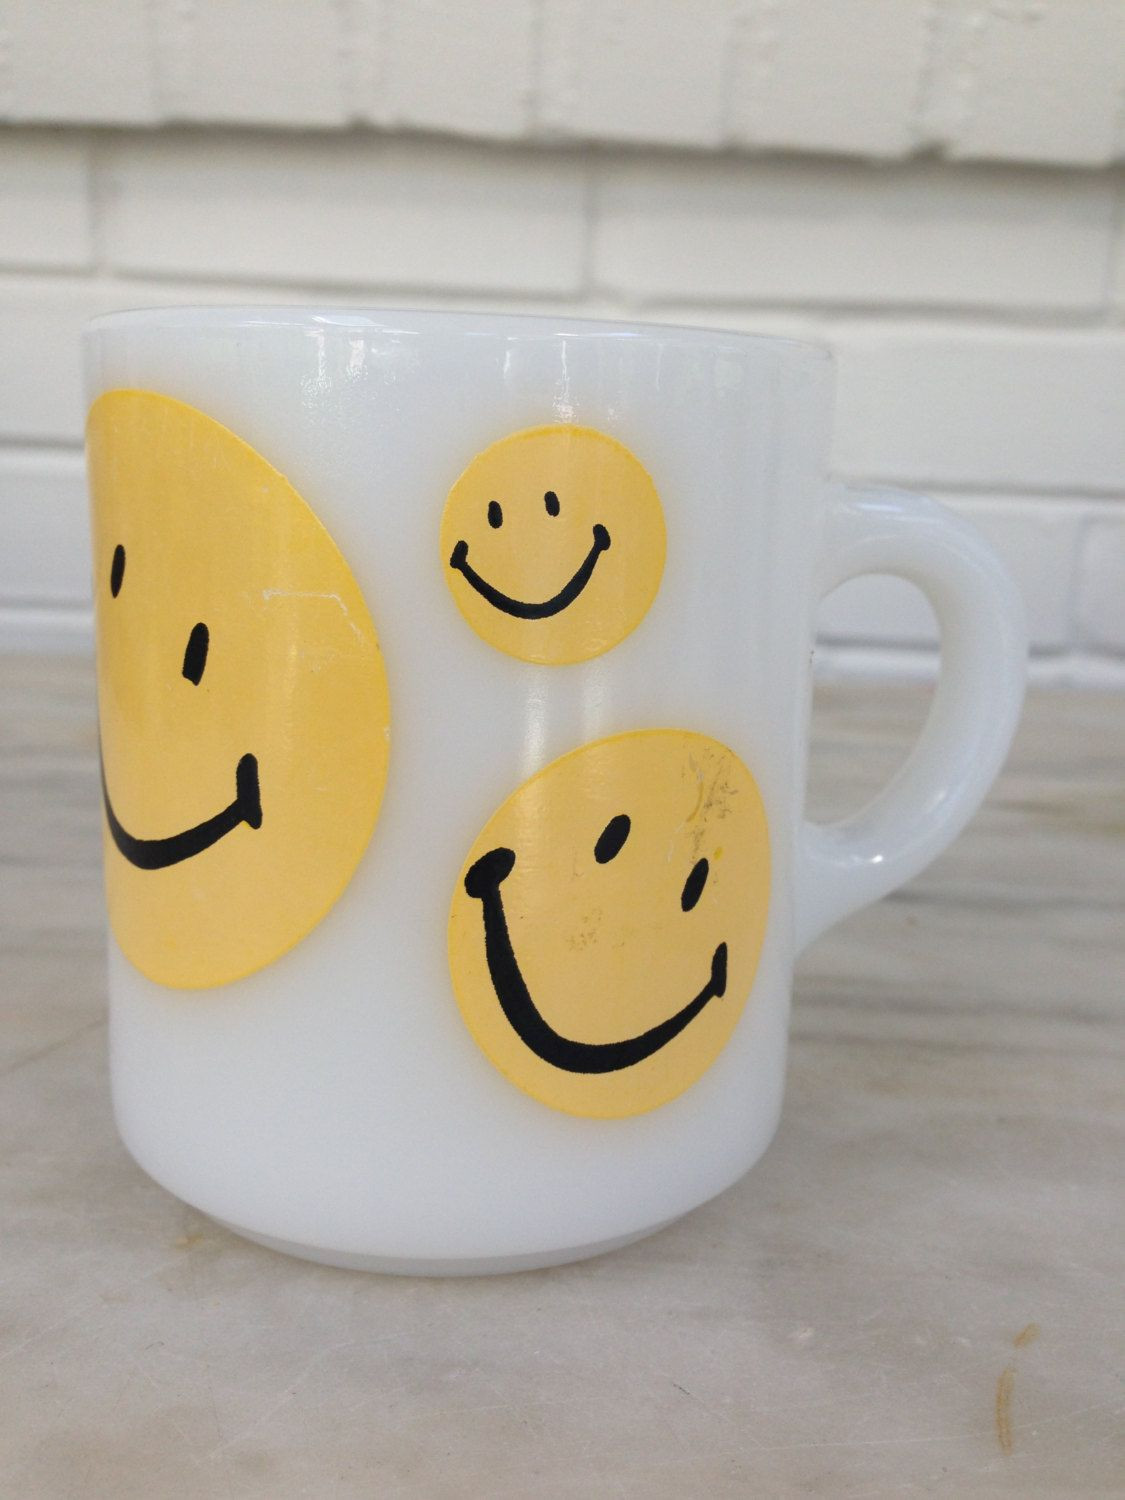 15 Cute Smiley Face Vase 2024 free download smiley face vase of vintage milk glass yellow smiley face mug 1970s by mothermuse on with regard to vintage milk glass yellow smiley face mug 1970s by mothermuse on etsy